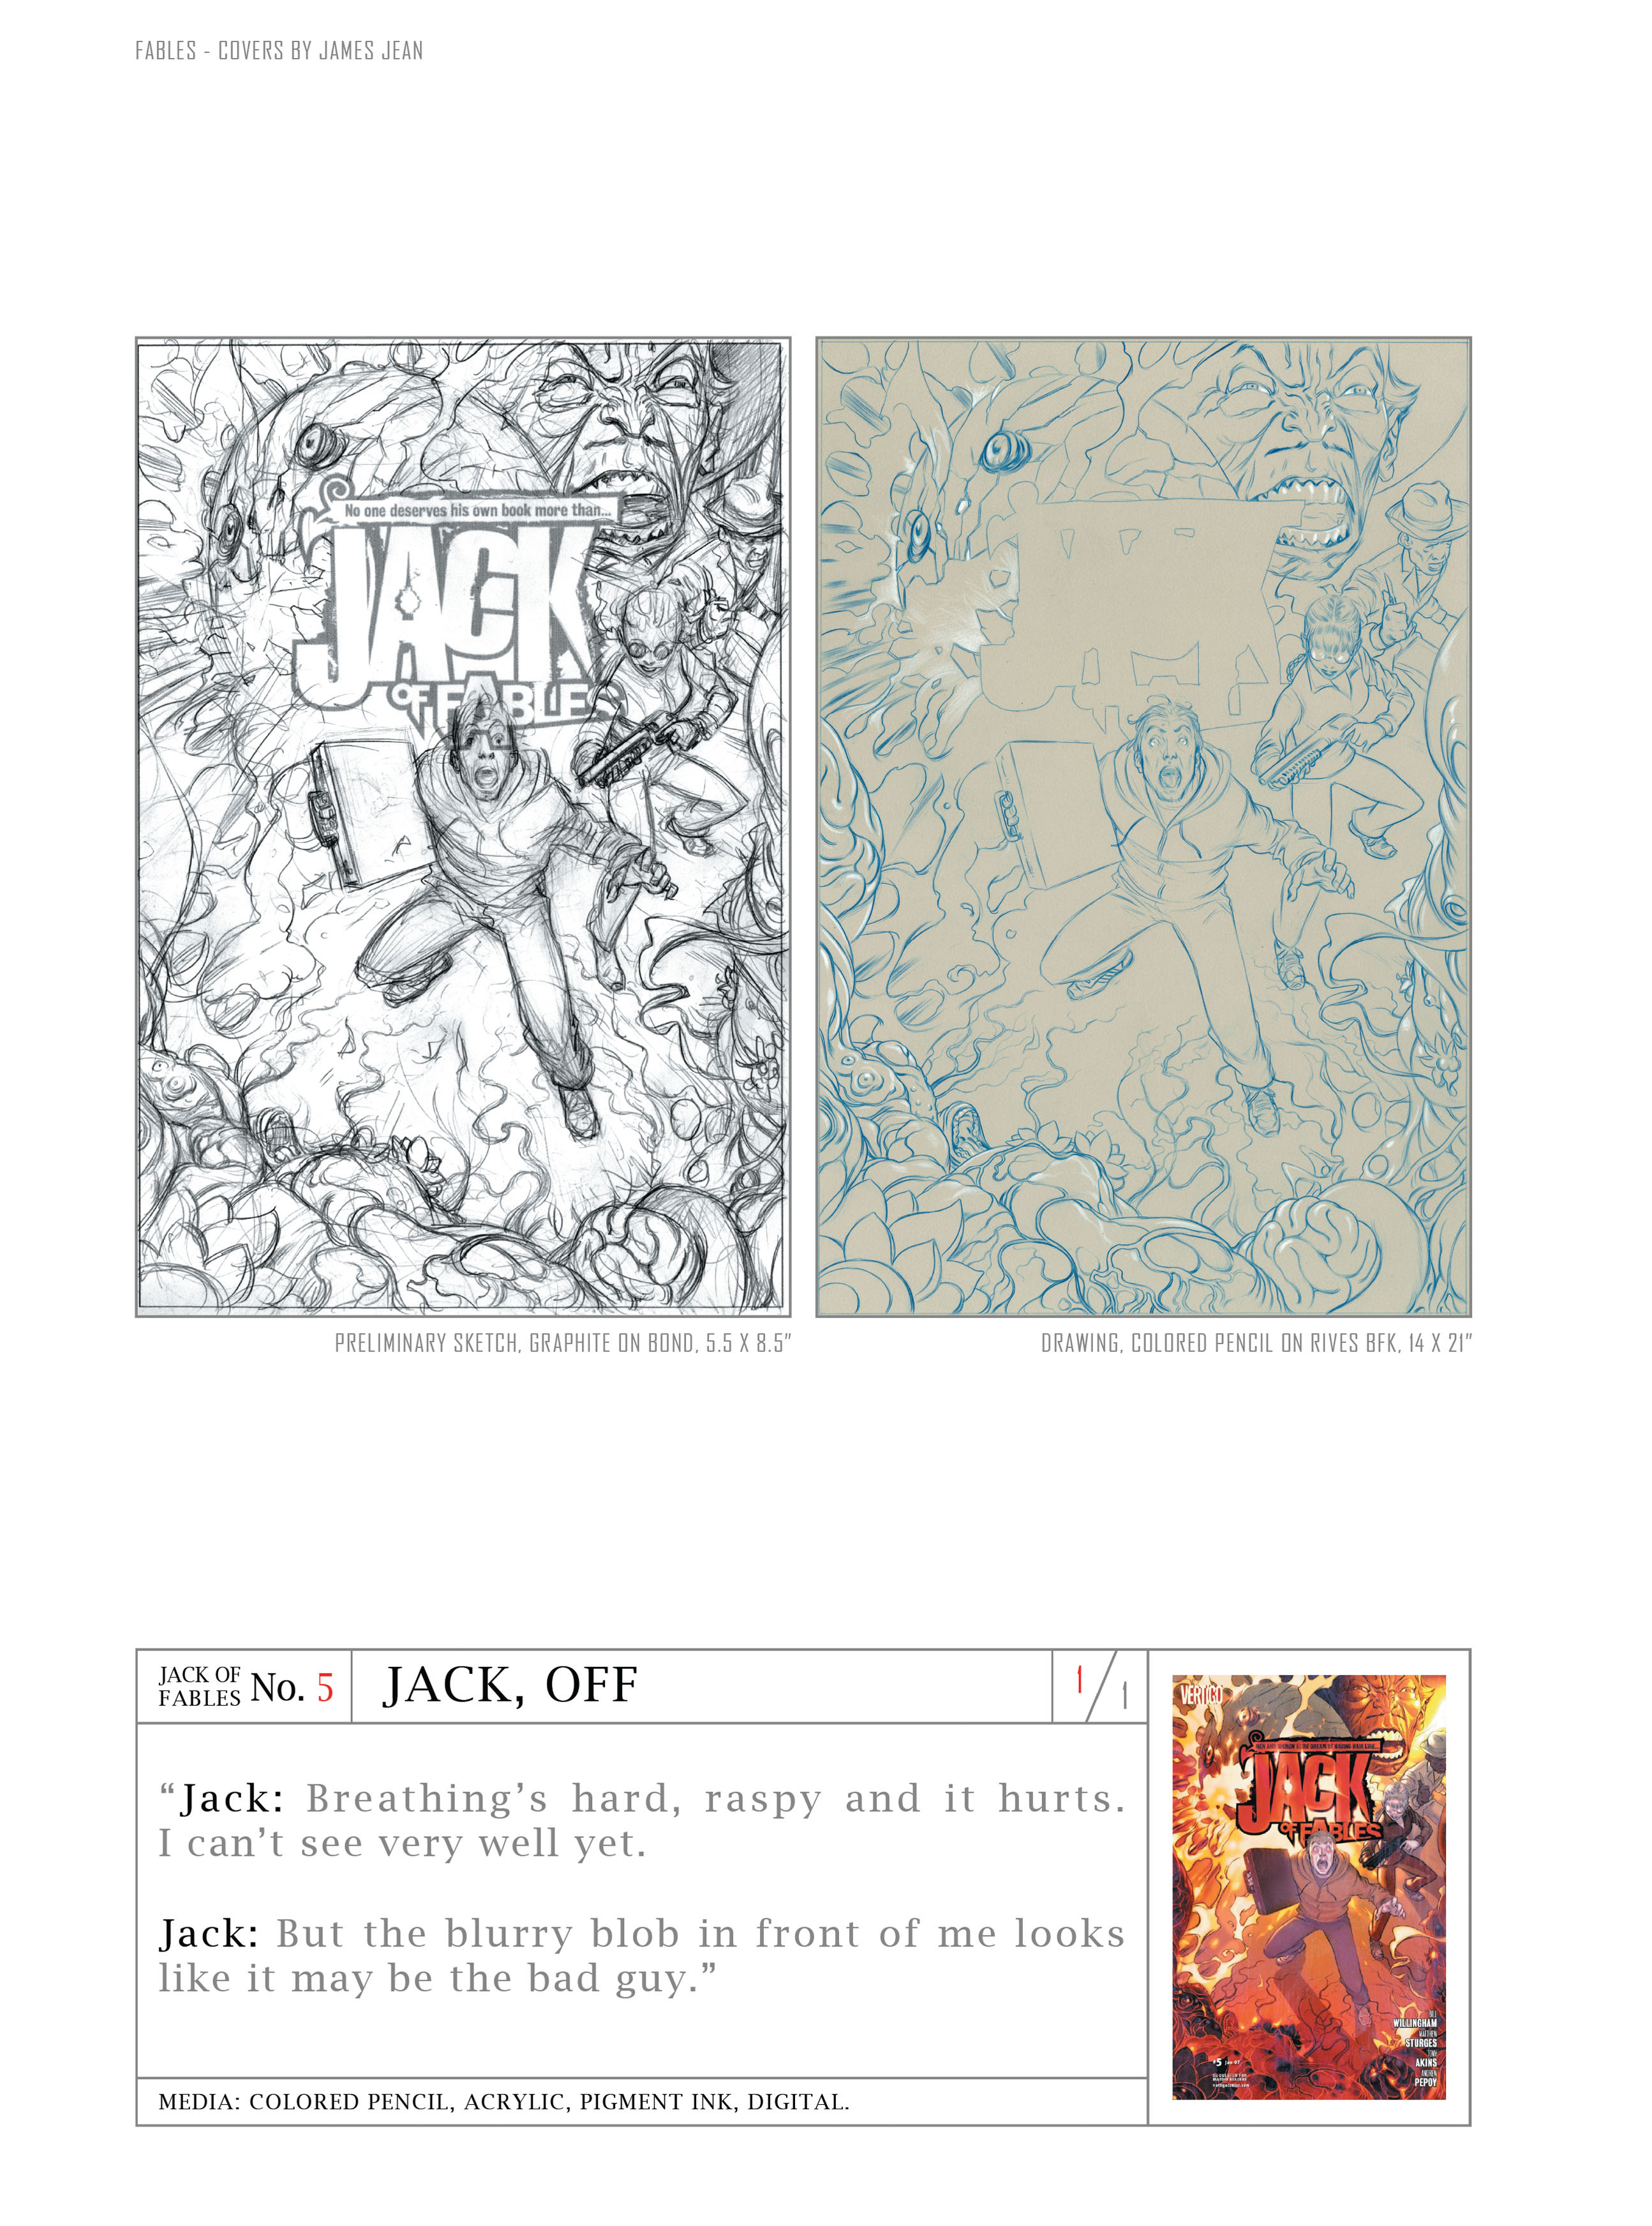 Read online Fables: Covers by James Jean comic -  Issue # TPB (Part 3) - 11